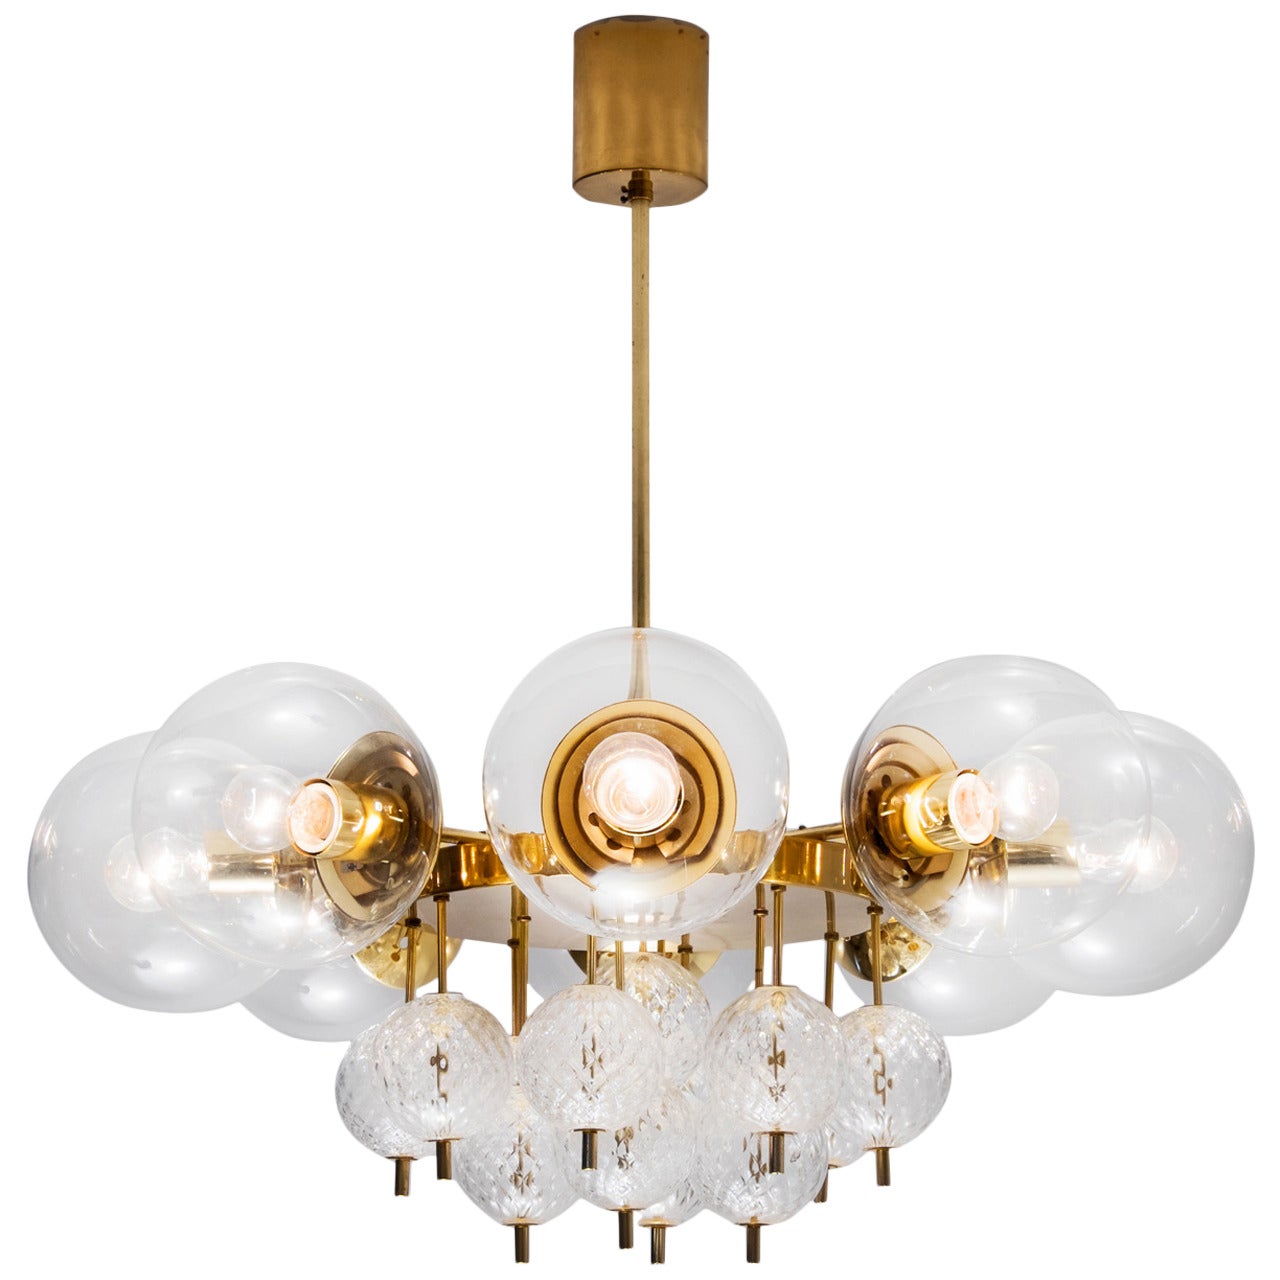 Large Chandeliers with Brass and Glass Bulbs